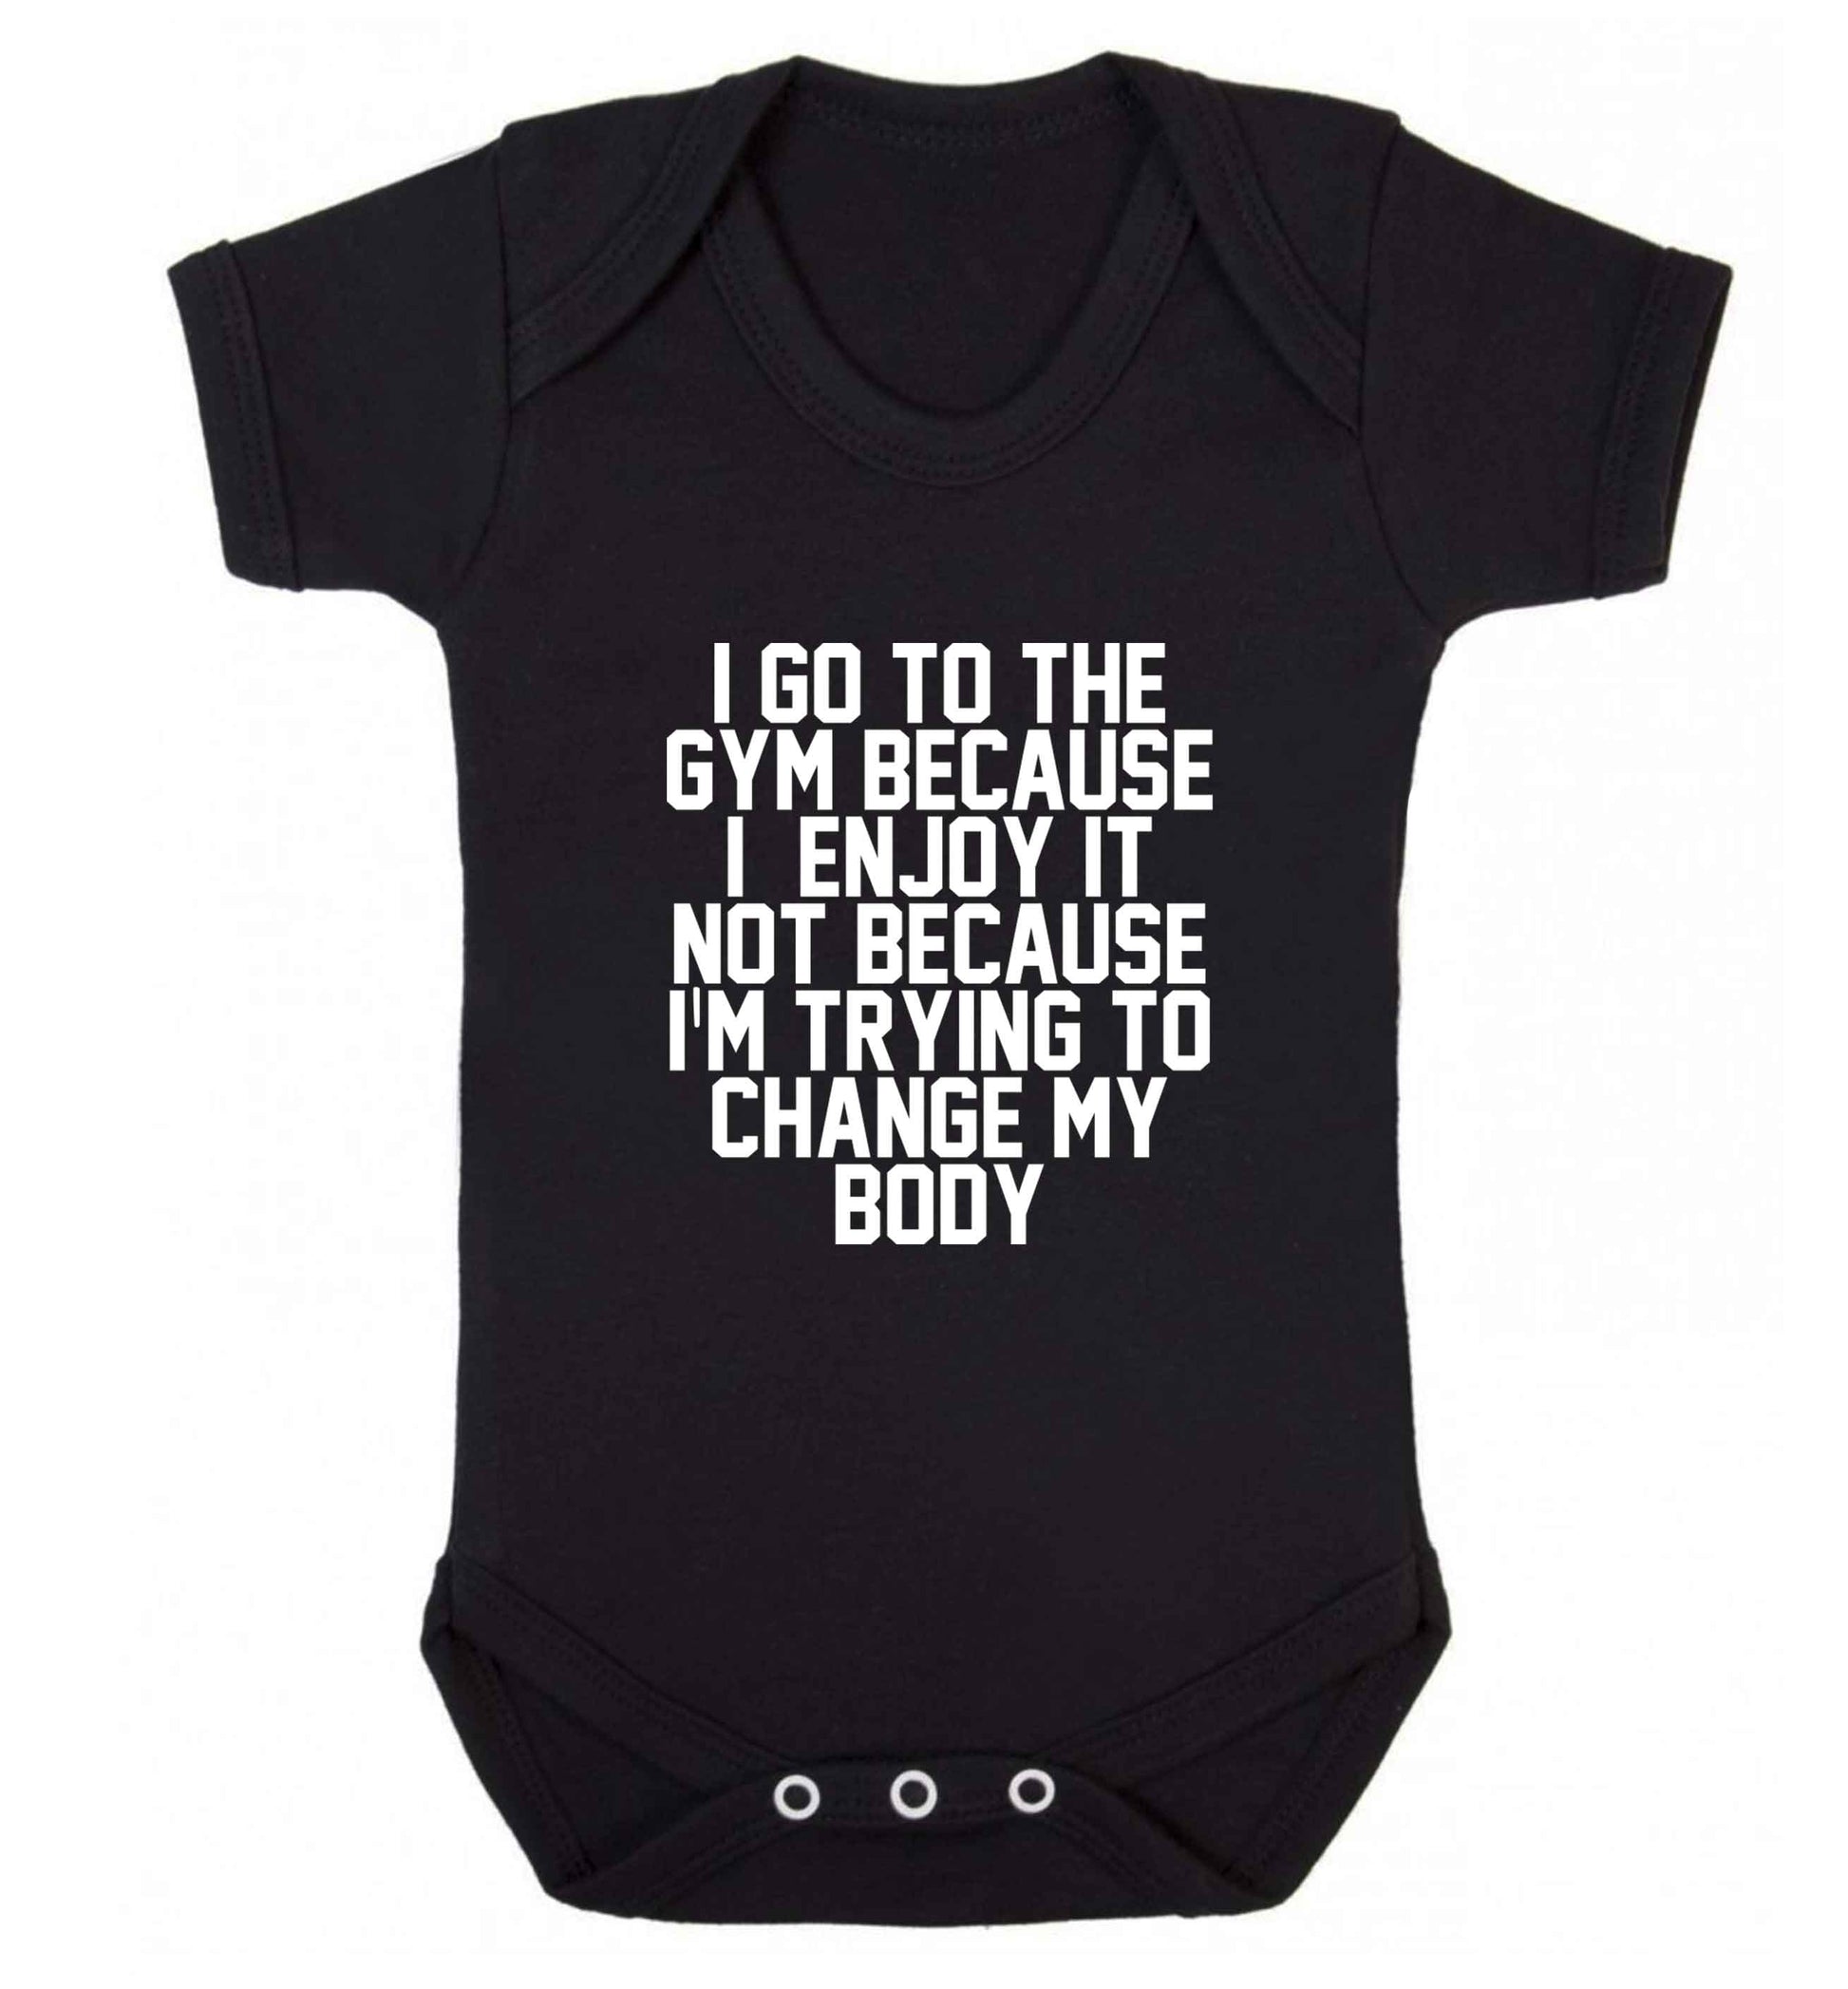 I go to the gym because I enjoy it not because I'm trying to change my body baby vest black 18-24 months